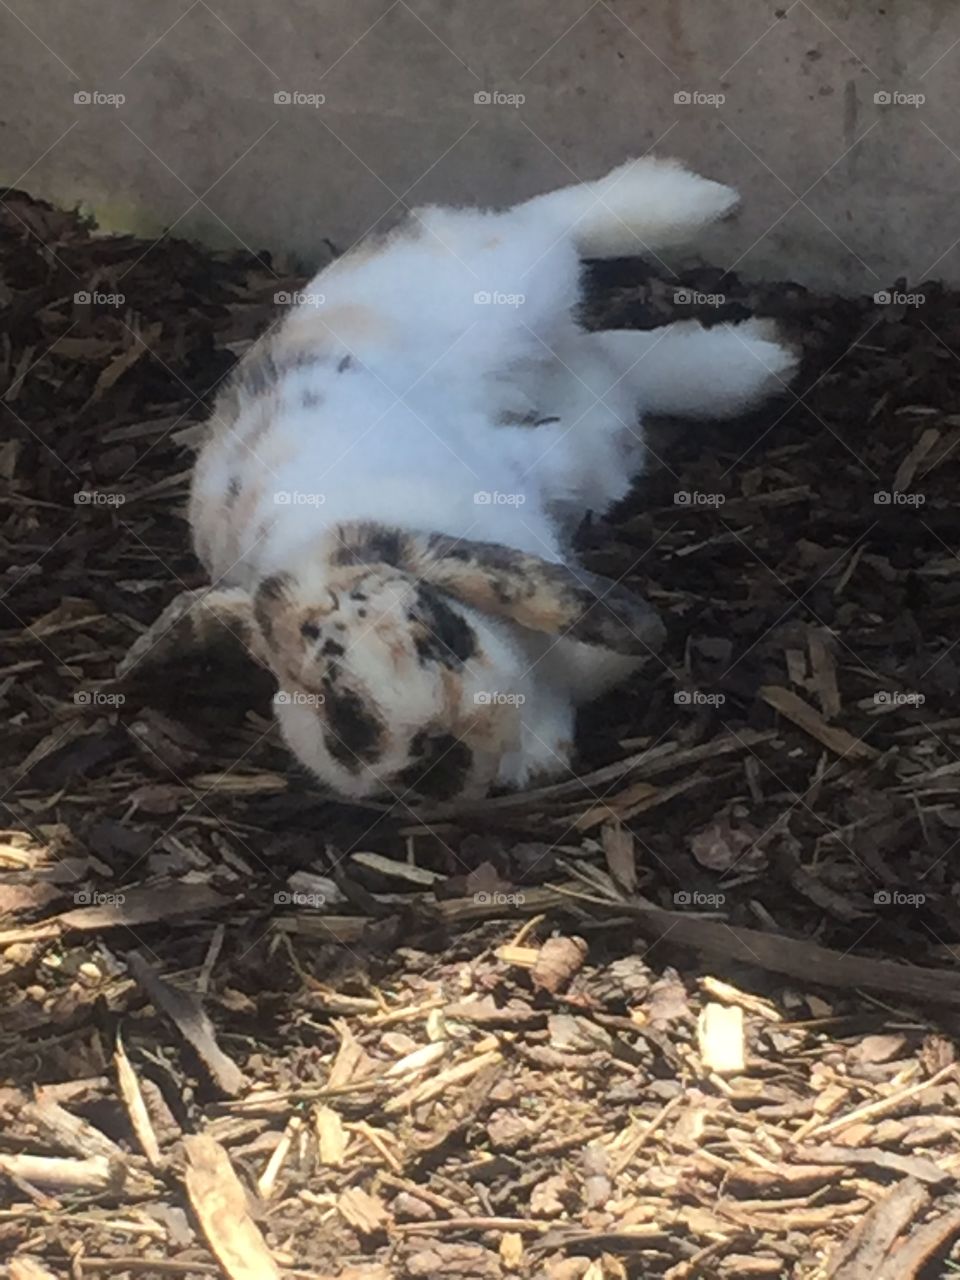 Rolling around on a hot day